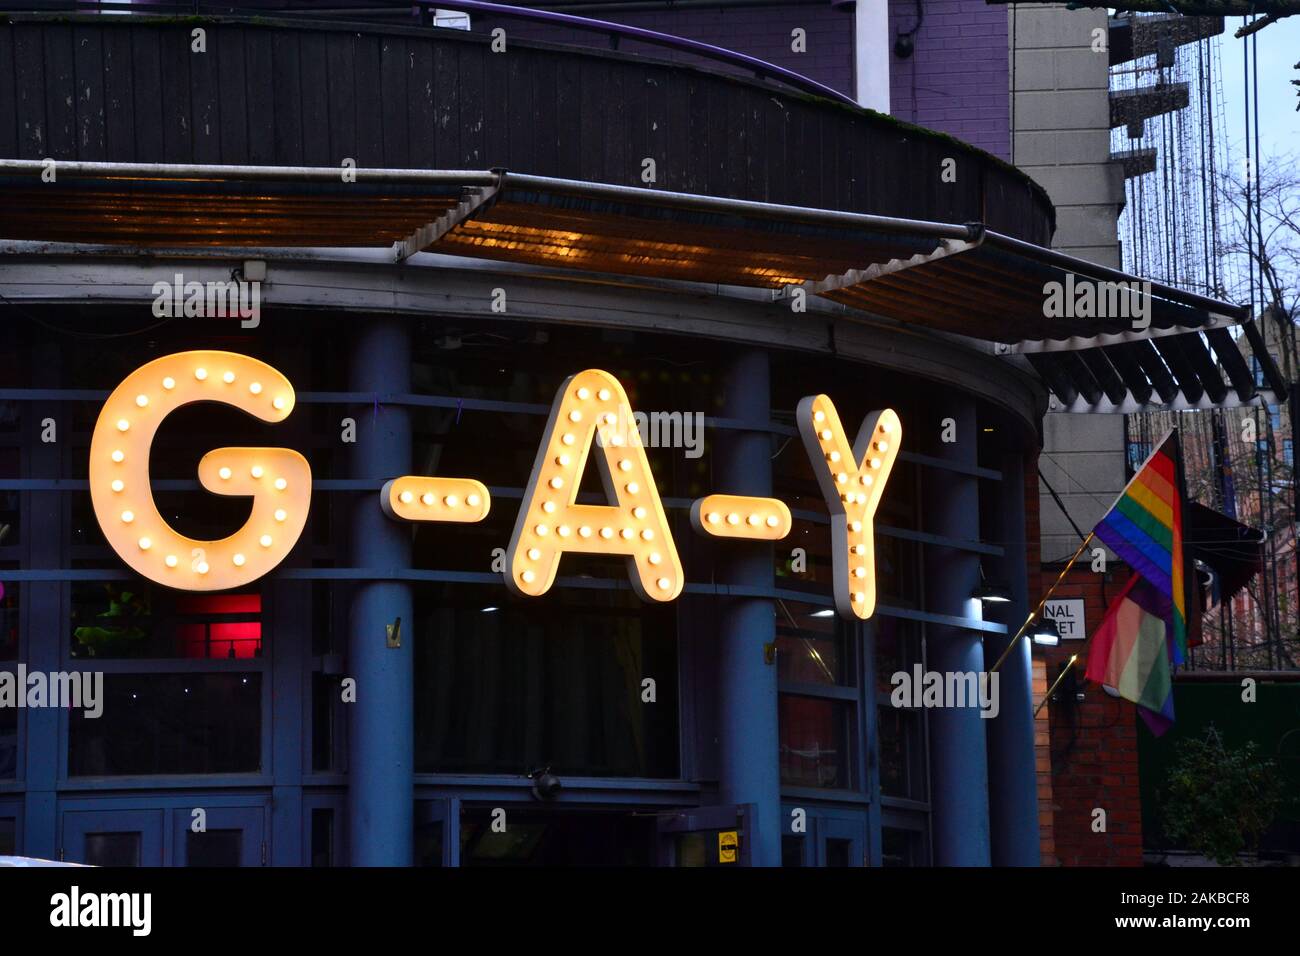 GAY nightclub, Canal Street, in the lesbian and gay village in Manchester, United Kingdom, near where serial rapist, Reynhard Sinaga, lived for 5 years, and picked up his victims, pretending to help them.  On January 6, 2020, a judge jailed Sinaga for life, specifying he should serve a minimum term of 30 years. He drugged his young, male victims and filmed himself raping them. Sinaga, aged 36, an Indonesian PhD student, was found guilty of 159 sexual offences against 48 men. The media report that the police believe he may have abused as many as 195 men. Stock Photo